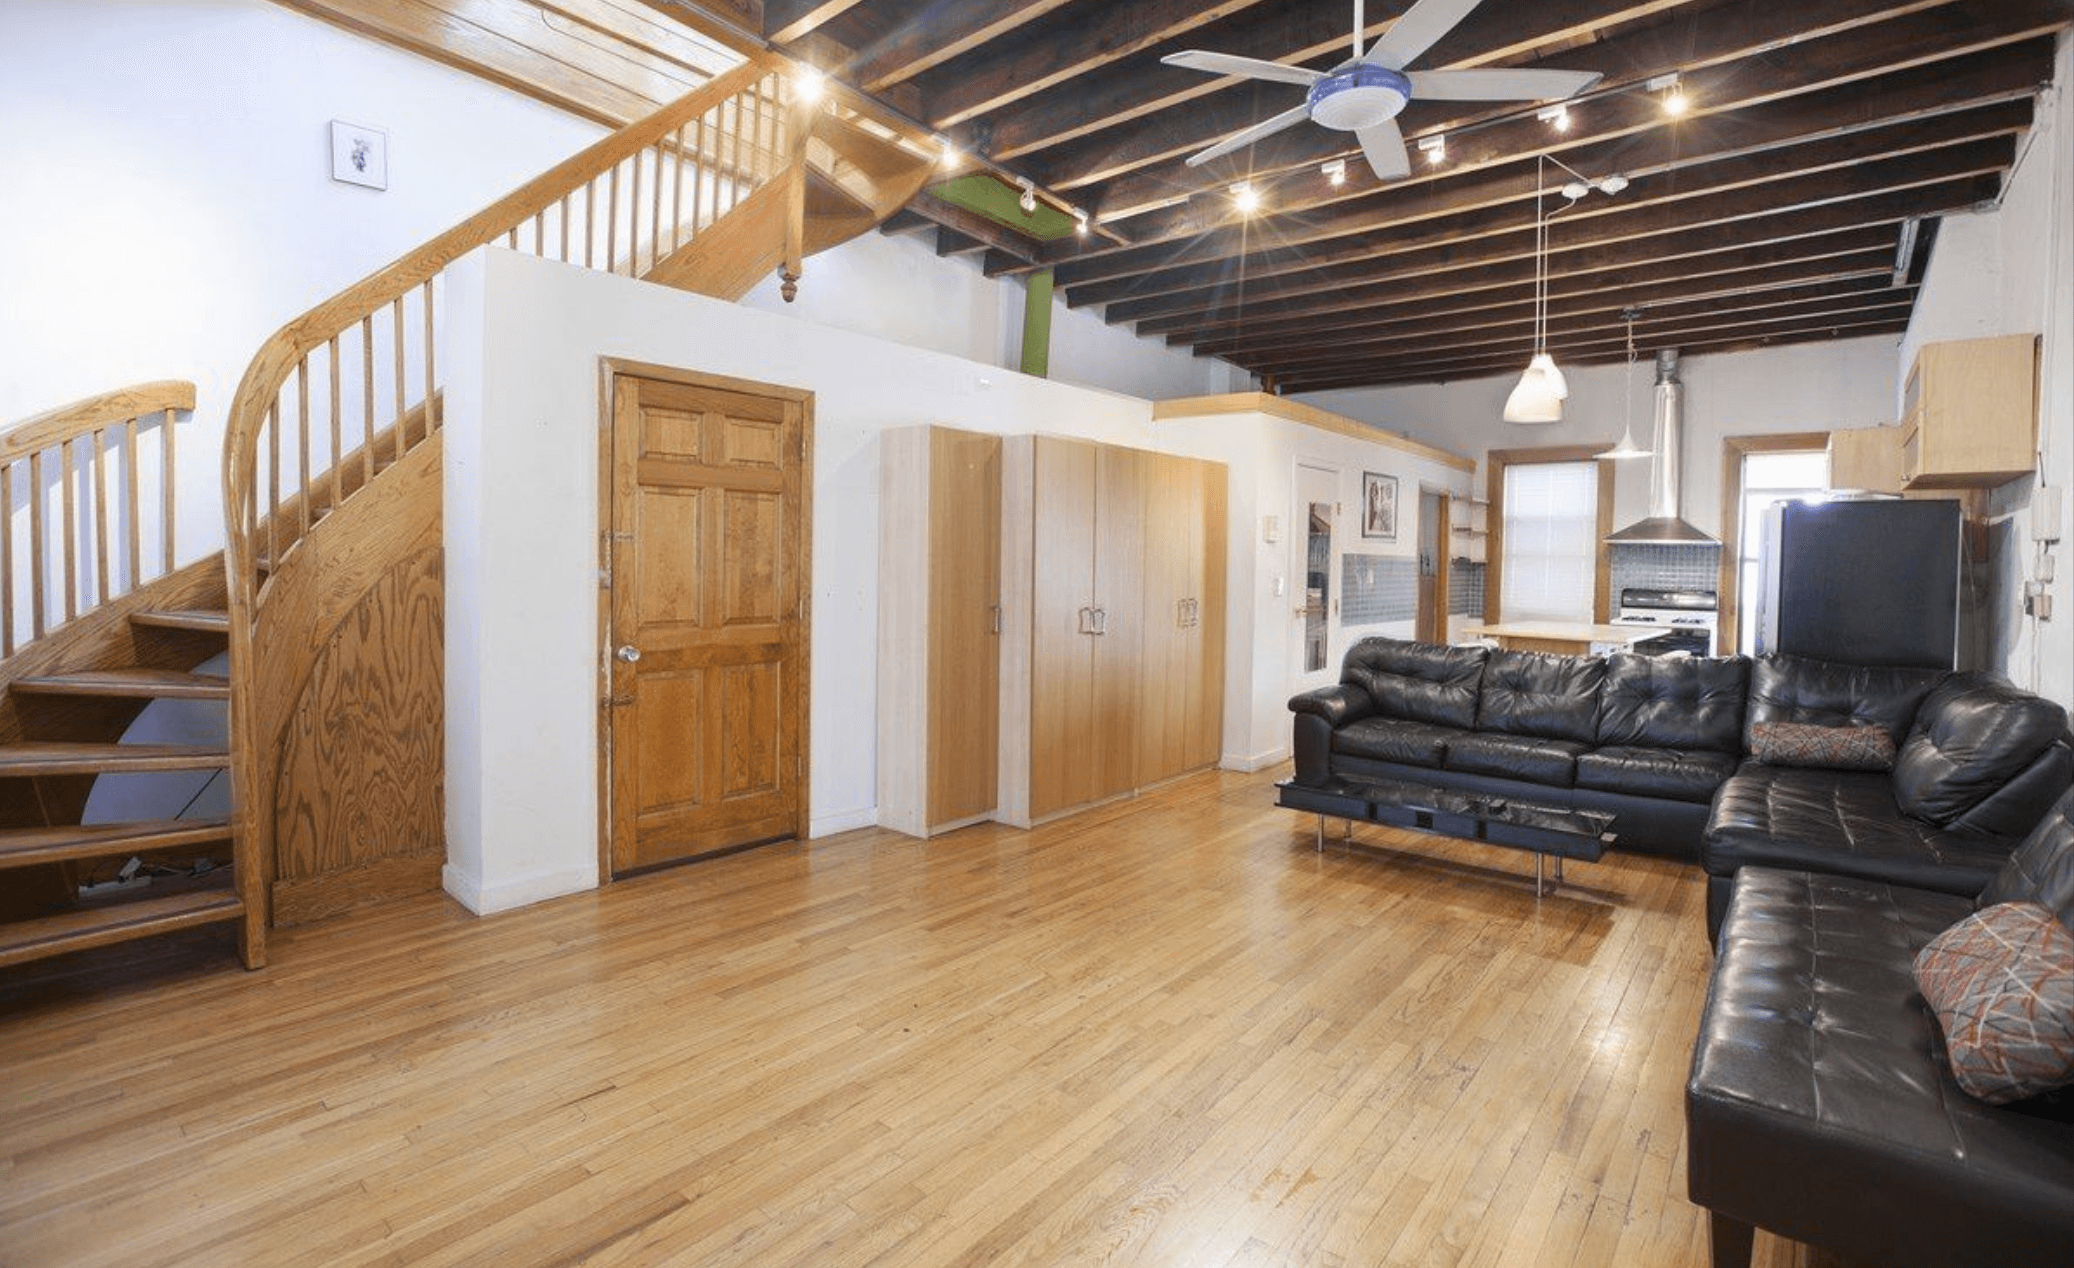 No Fee - Huge Loft Duplex with Private Roof Deck in Prime Williamsburg, Brooklyn